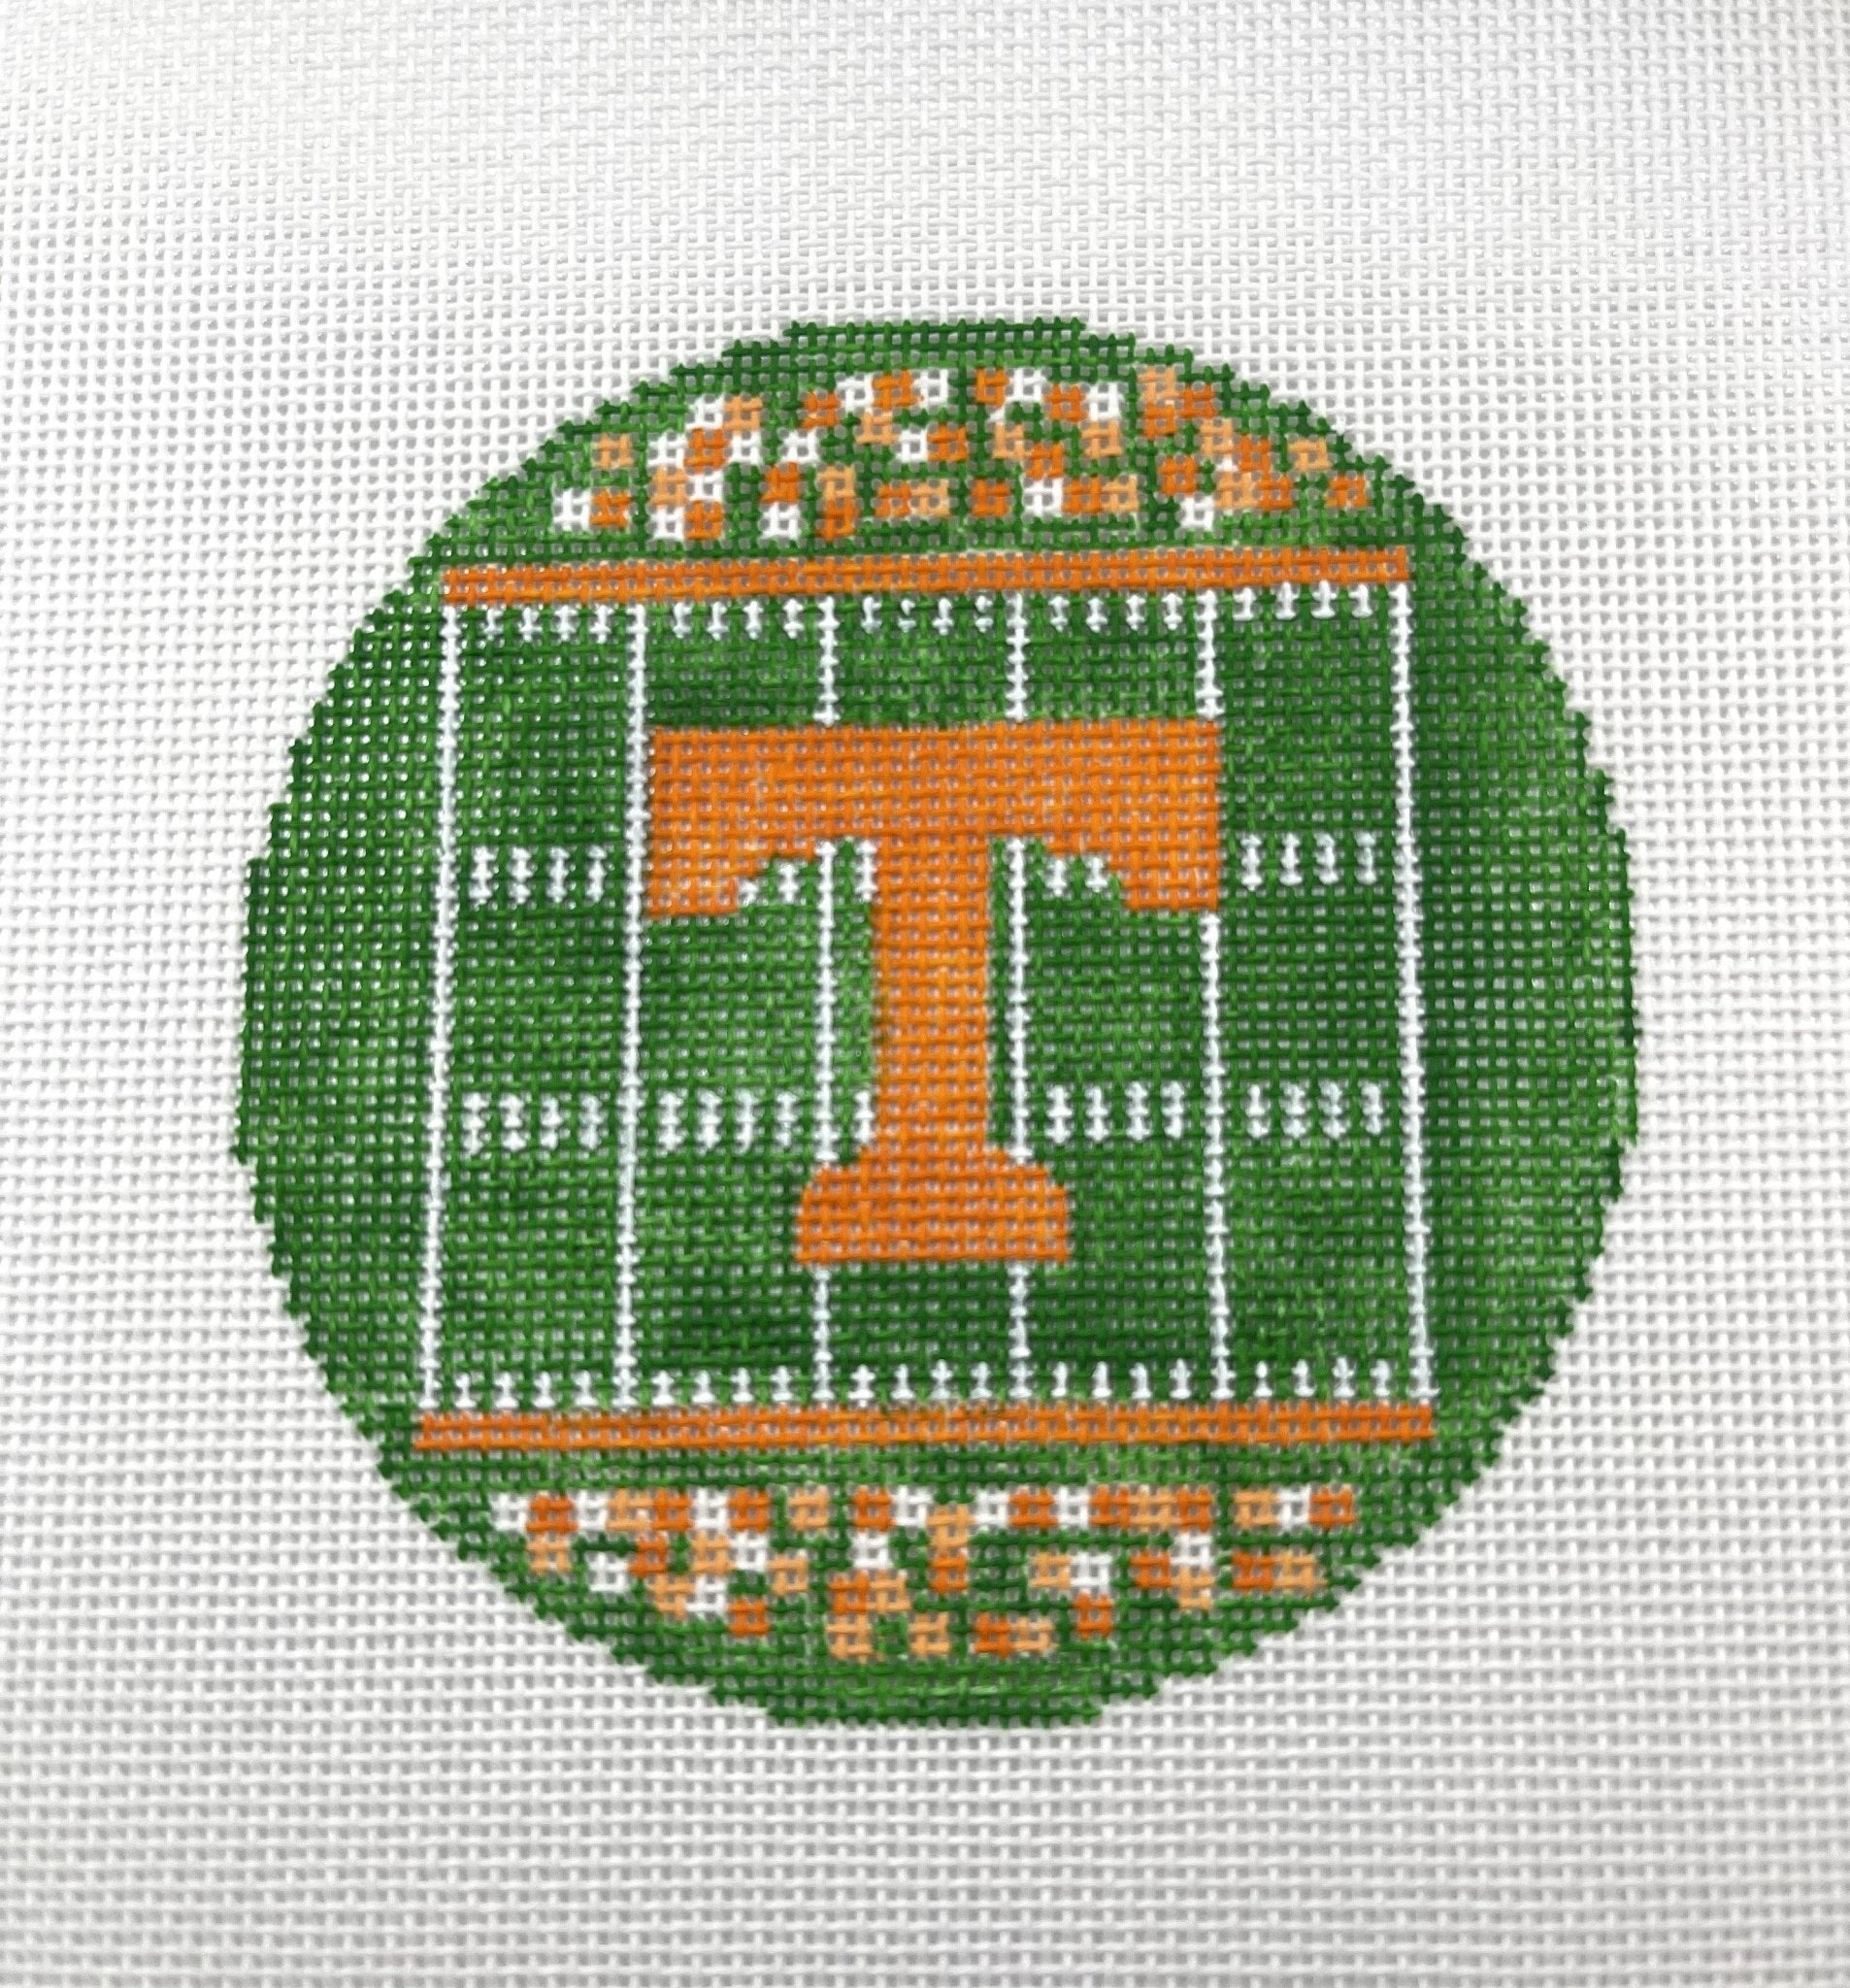 Tennessee Football Field Round Canvas - Needlepoint by Laura